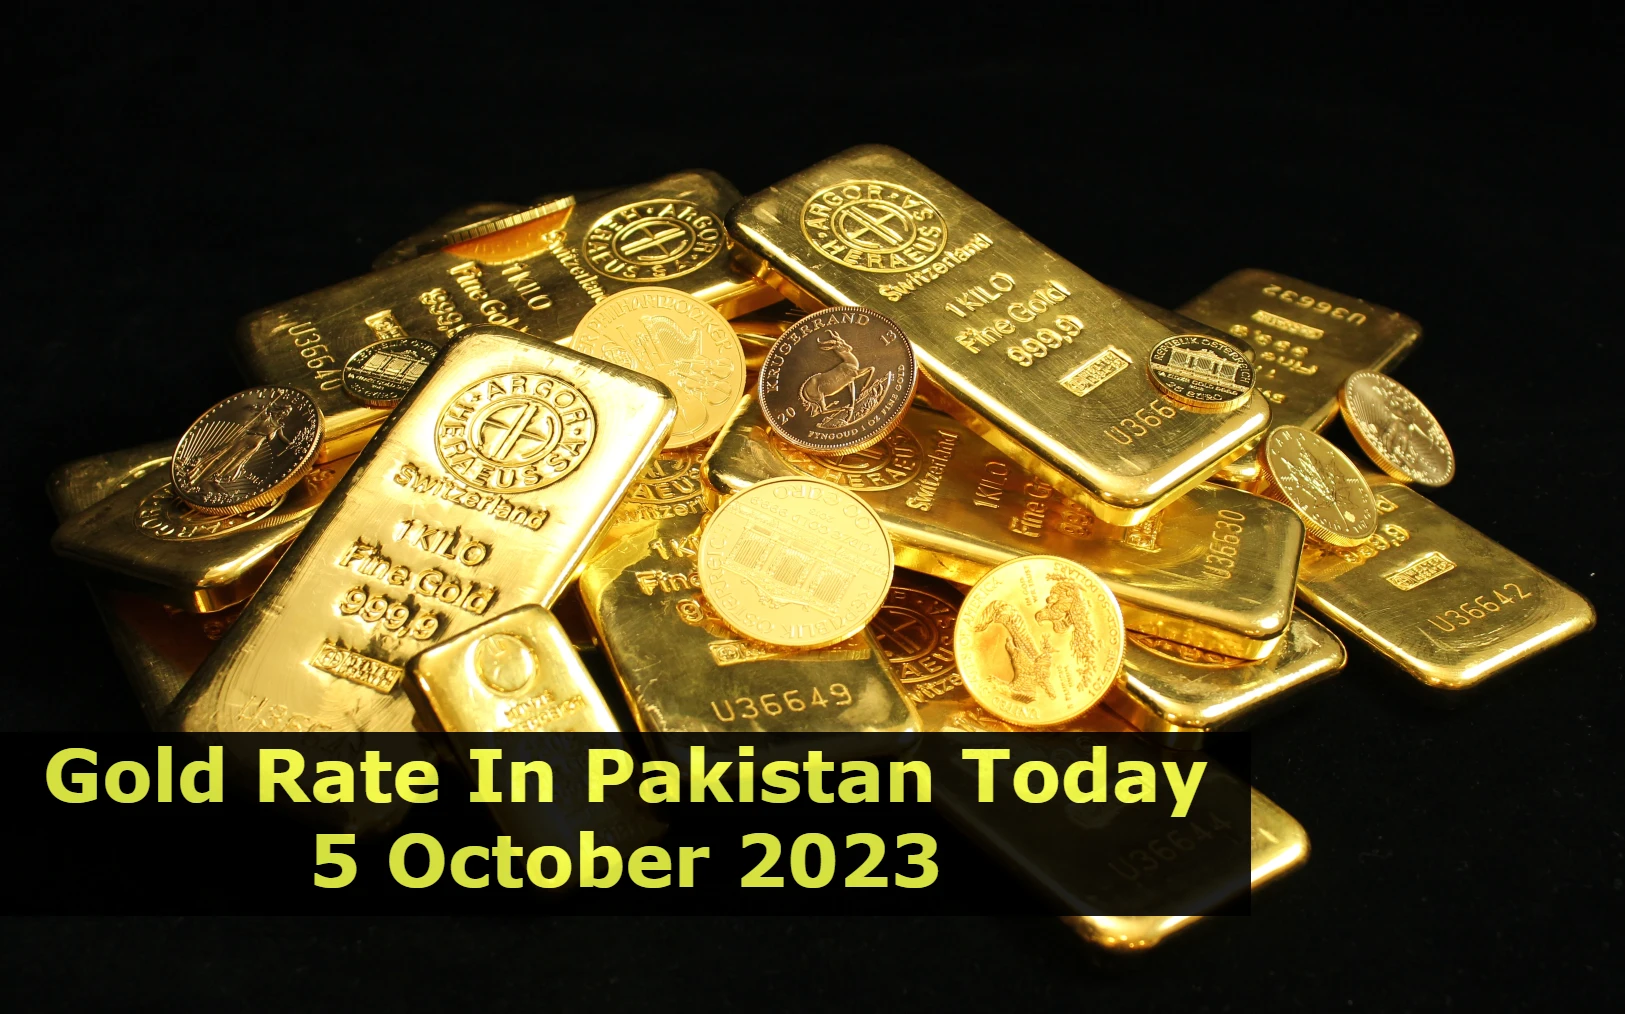 Gold Rate In Pakistan Today 5 October 2023